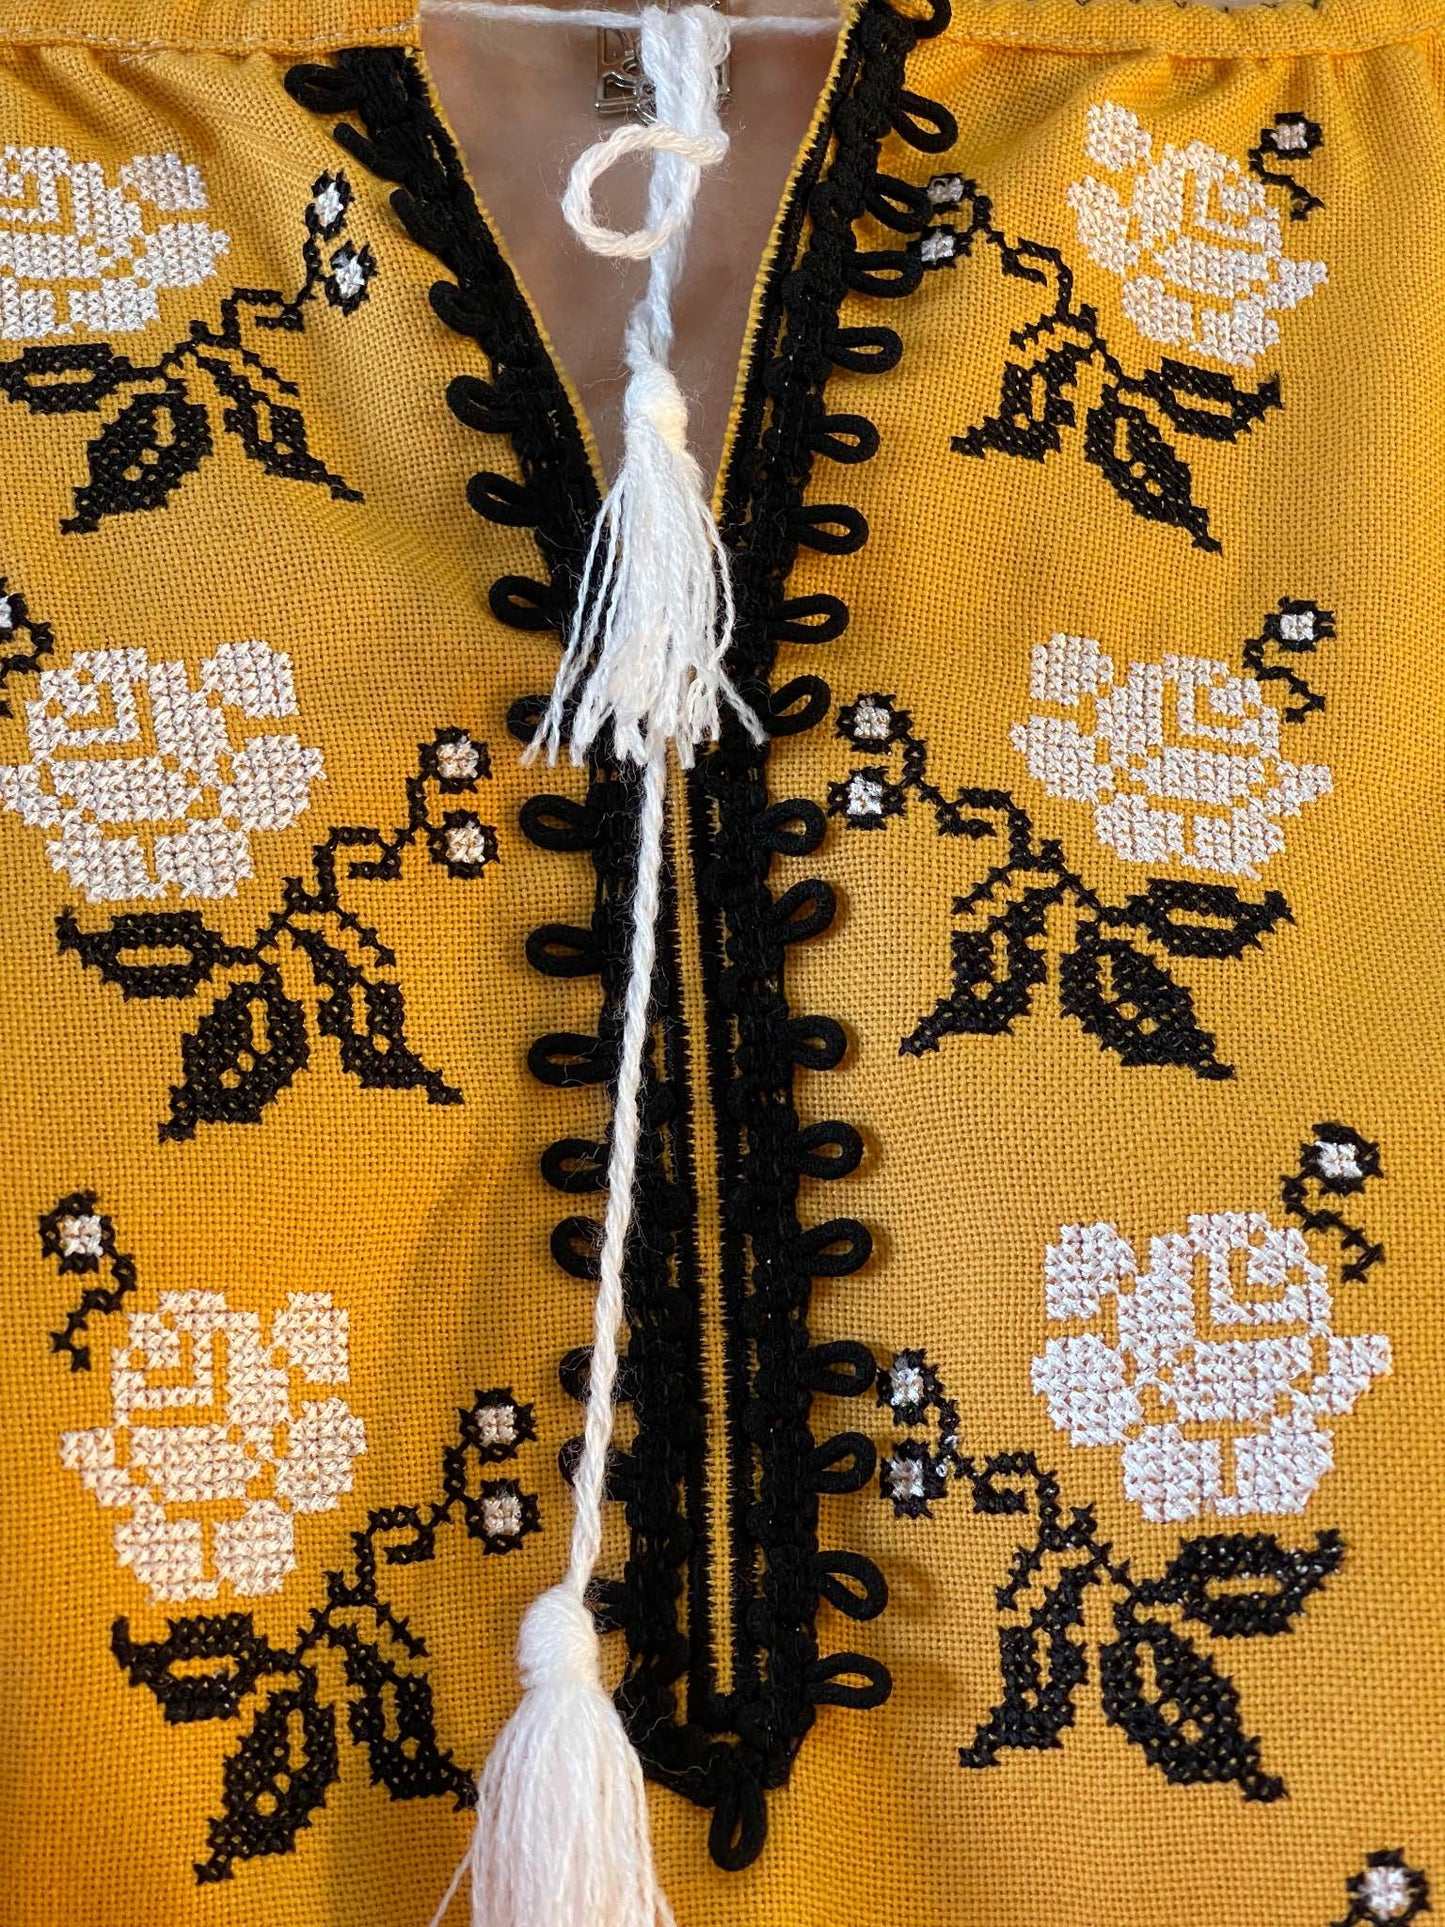 The Ochre Women's Blouse with White and Black Embroidery